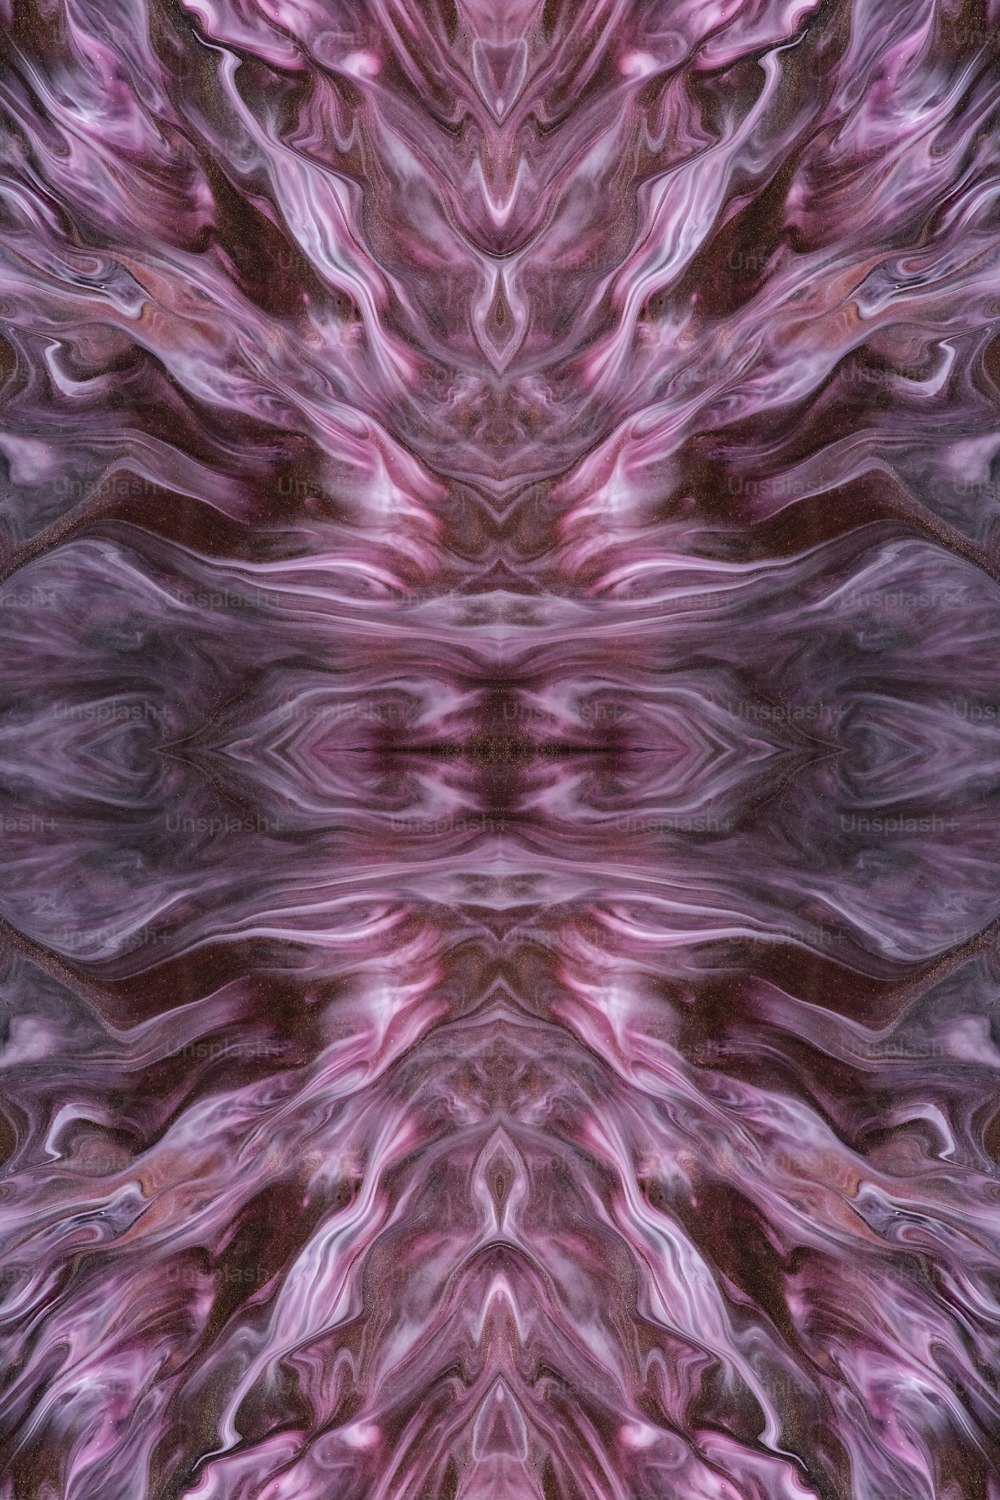 an abstract image of a pink and purple flower